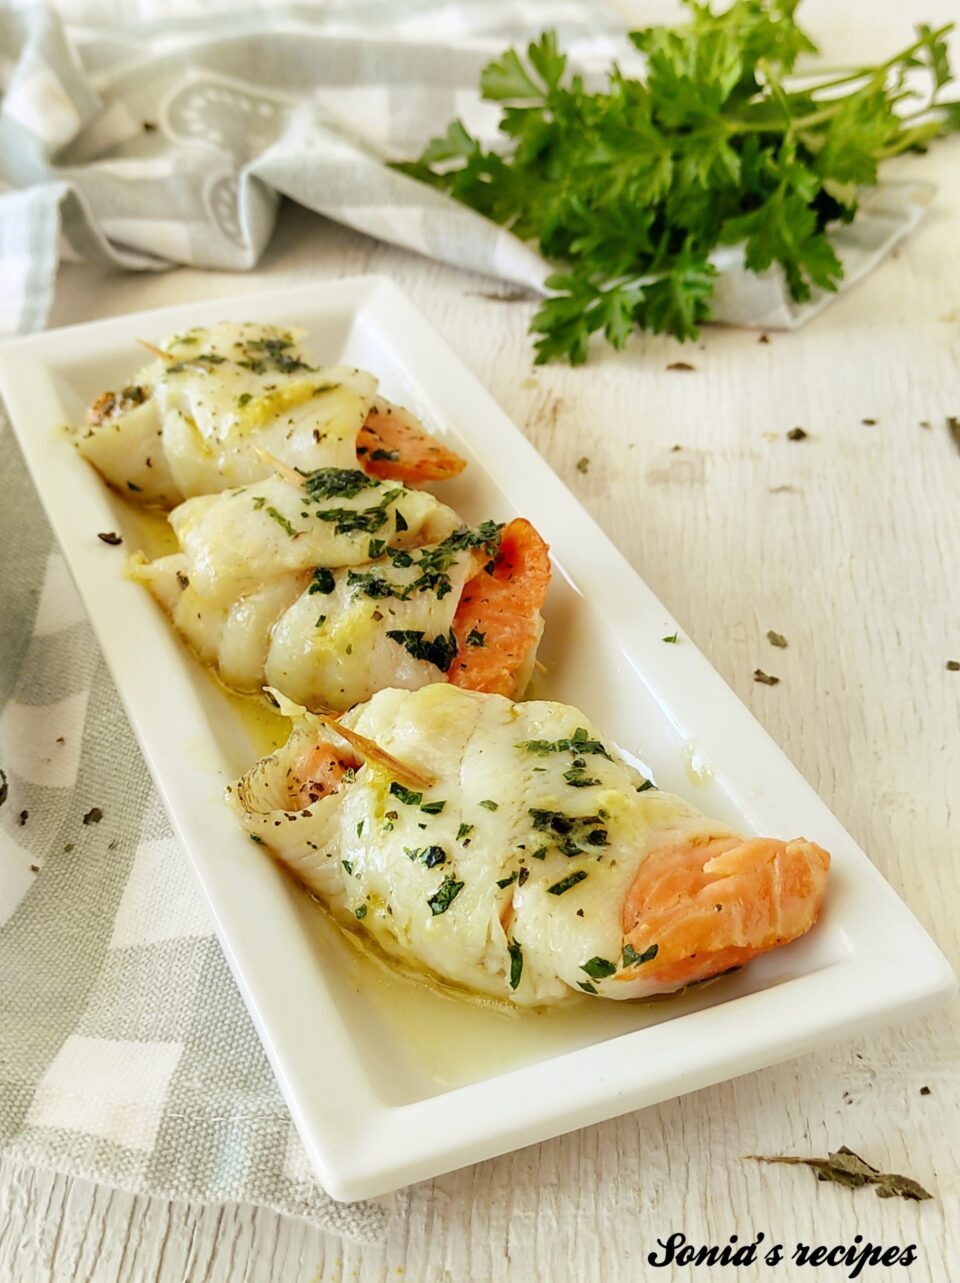 Rolls of plaice and salmon